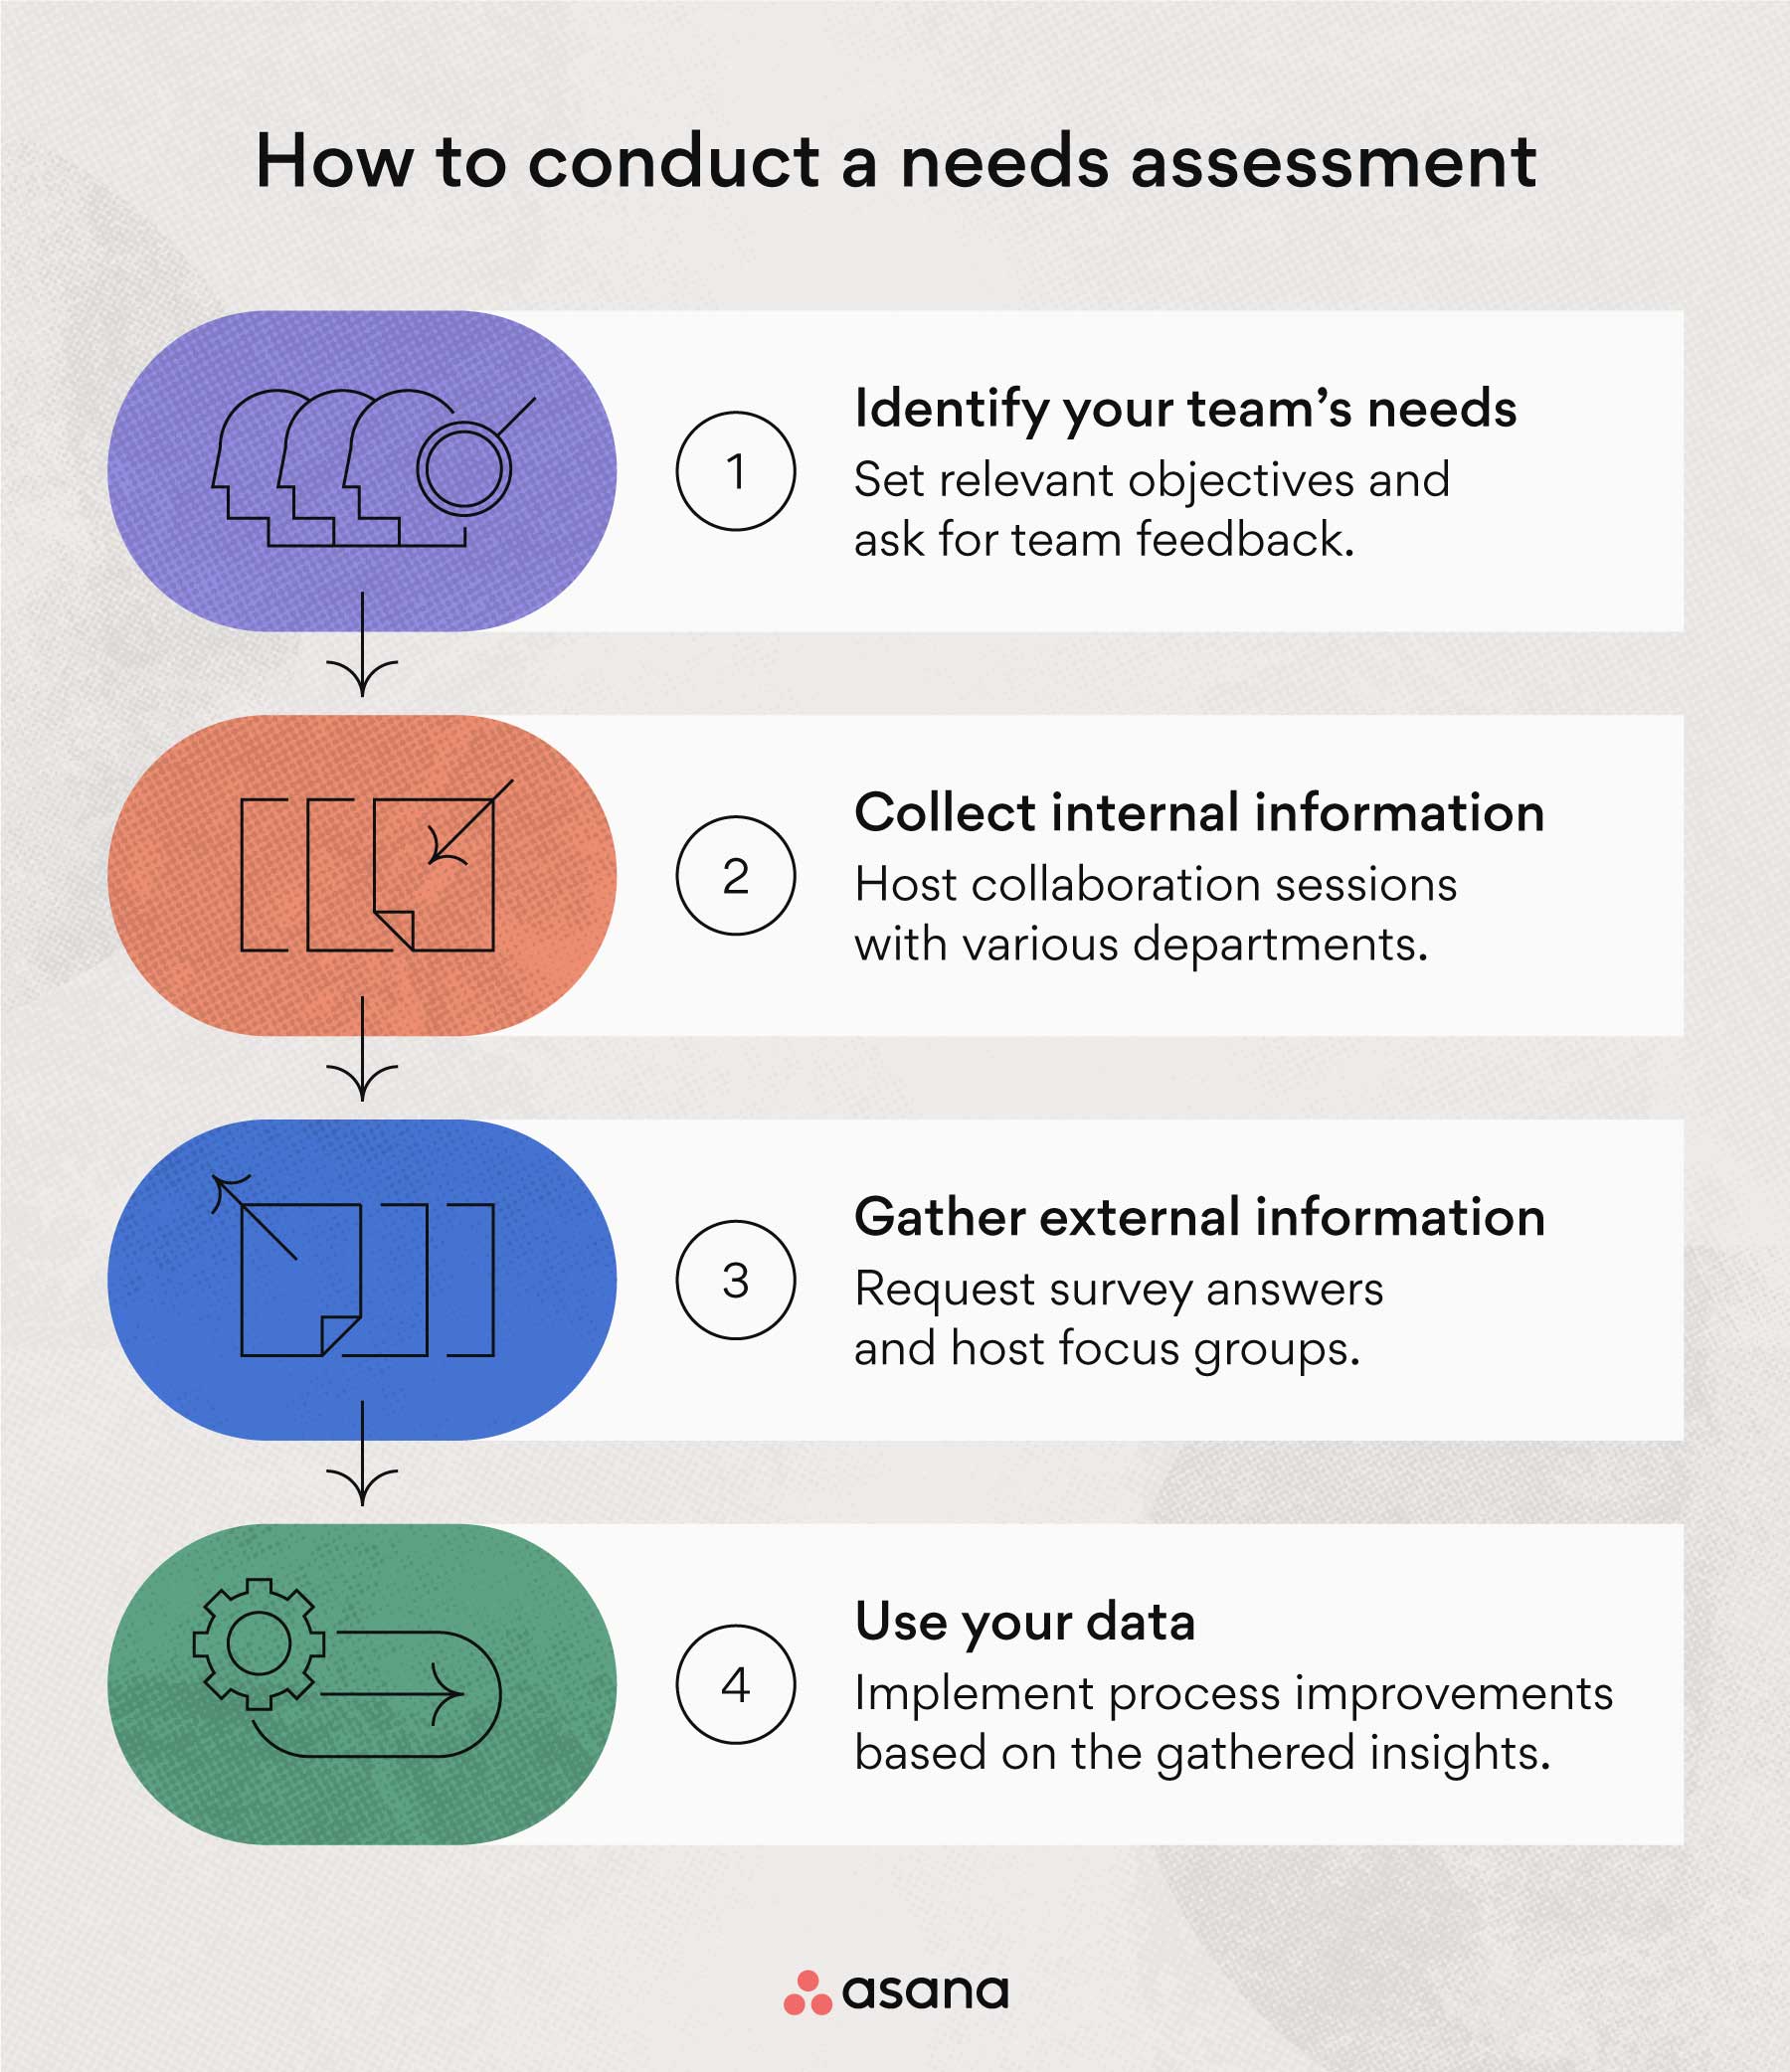 How to conduct a needs assessment